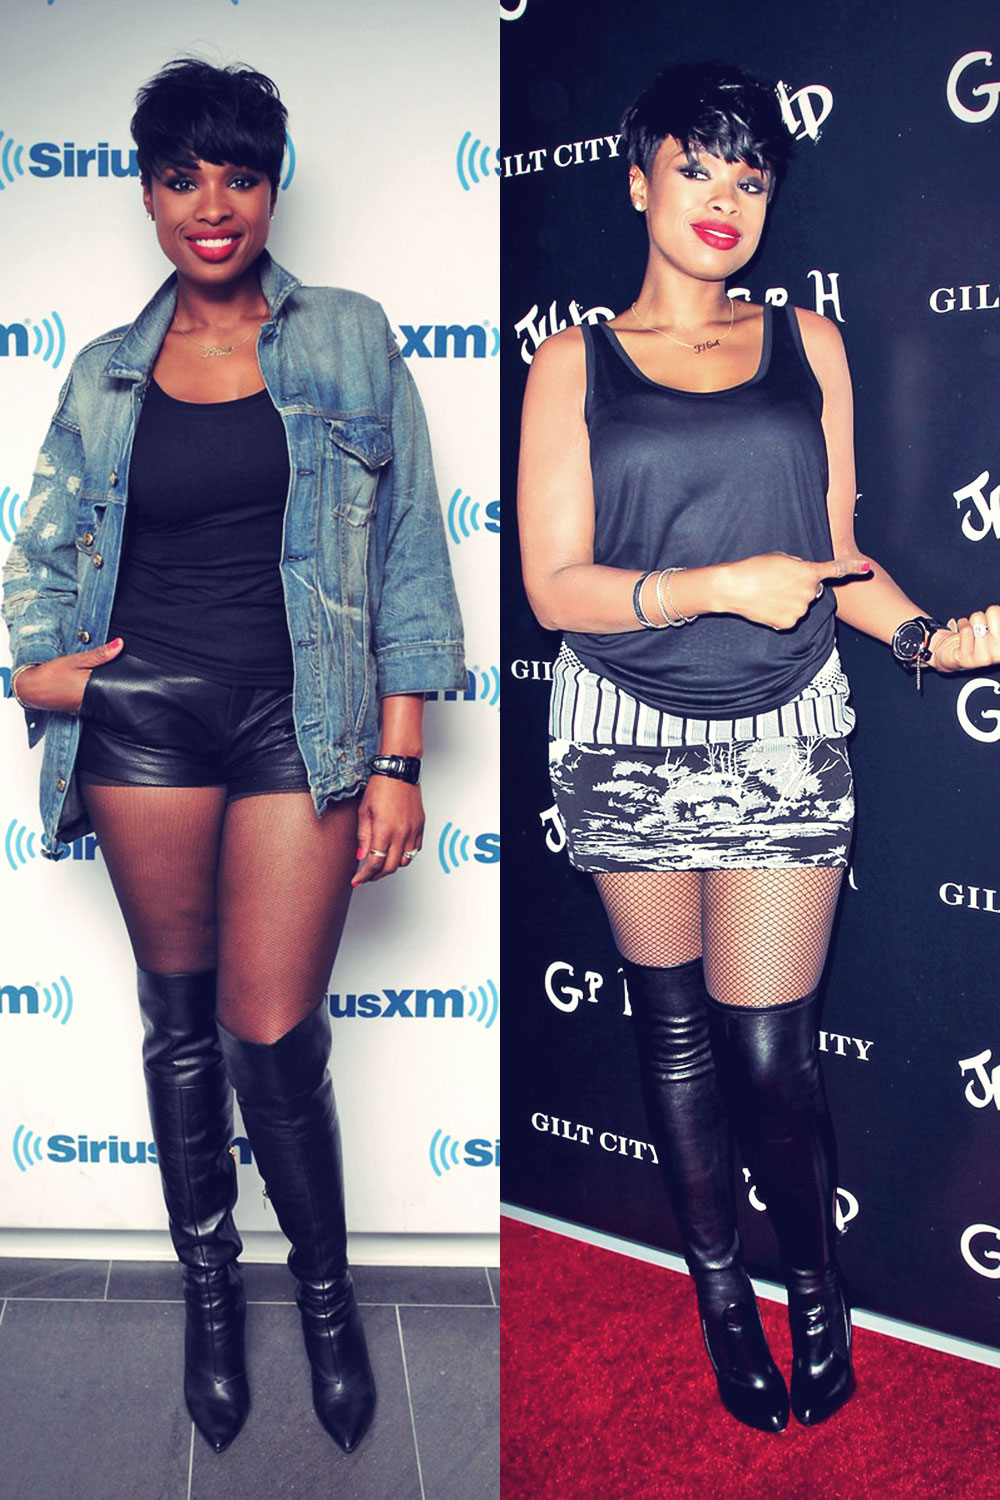 Jennifer Hudson at her JHUD album launch party and at the SiriusXM Studio